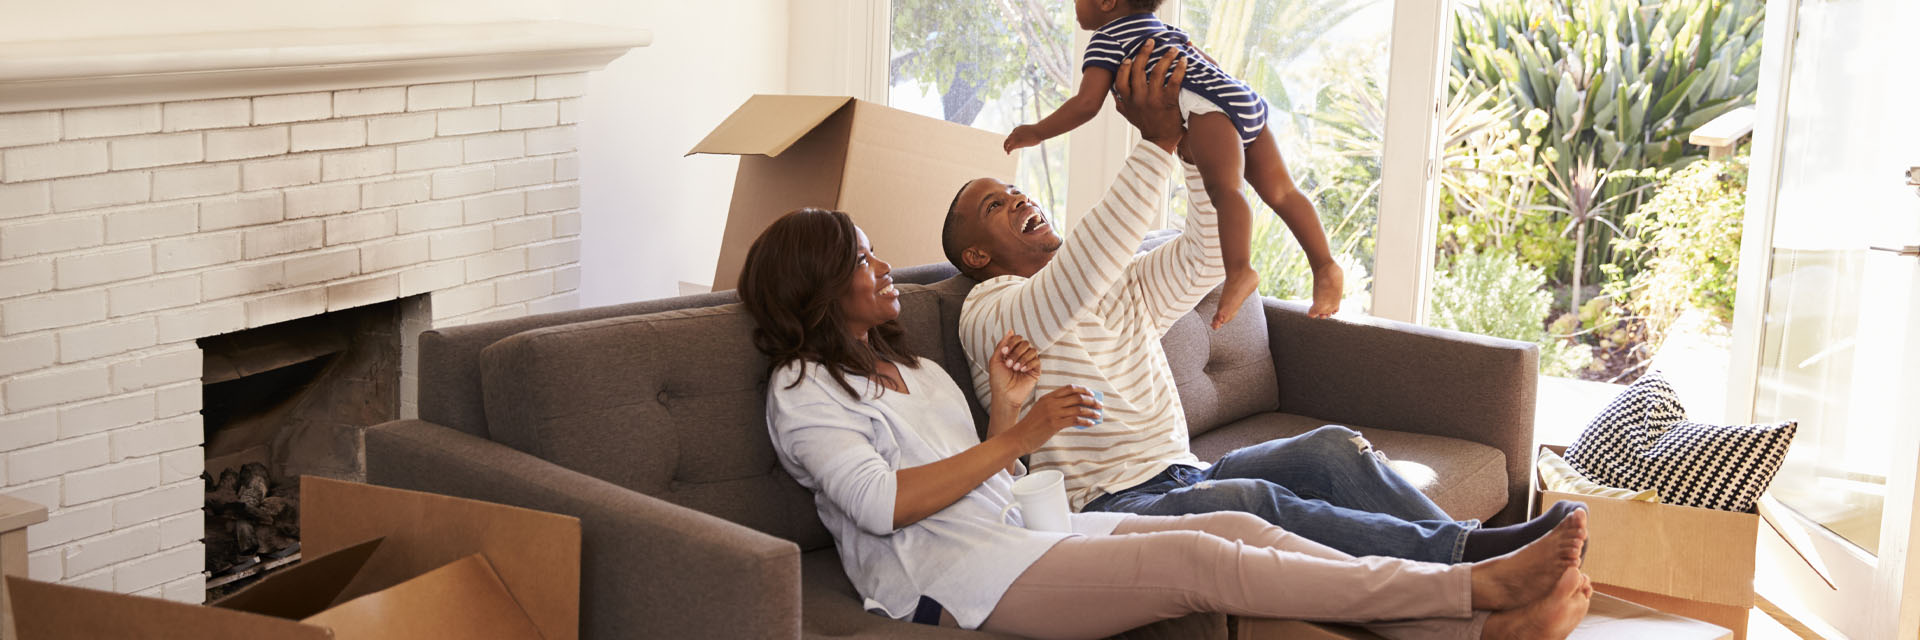 Image showing a couple and their toddler relaxing on the sofa surrounded by boxes